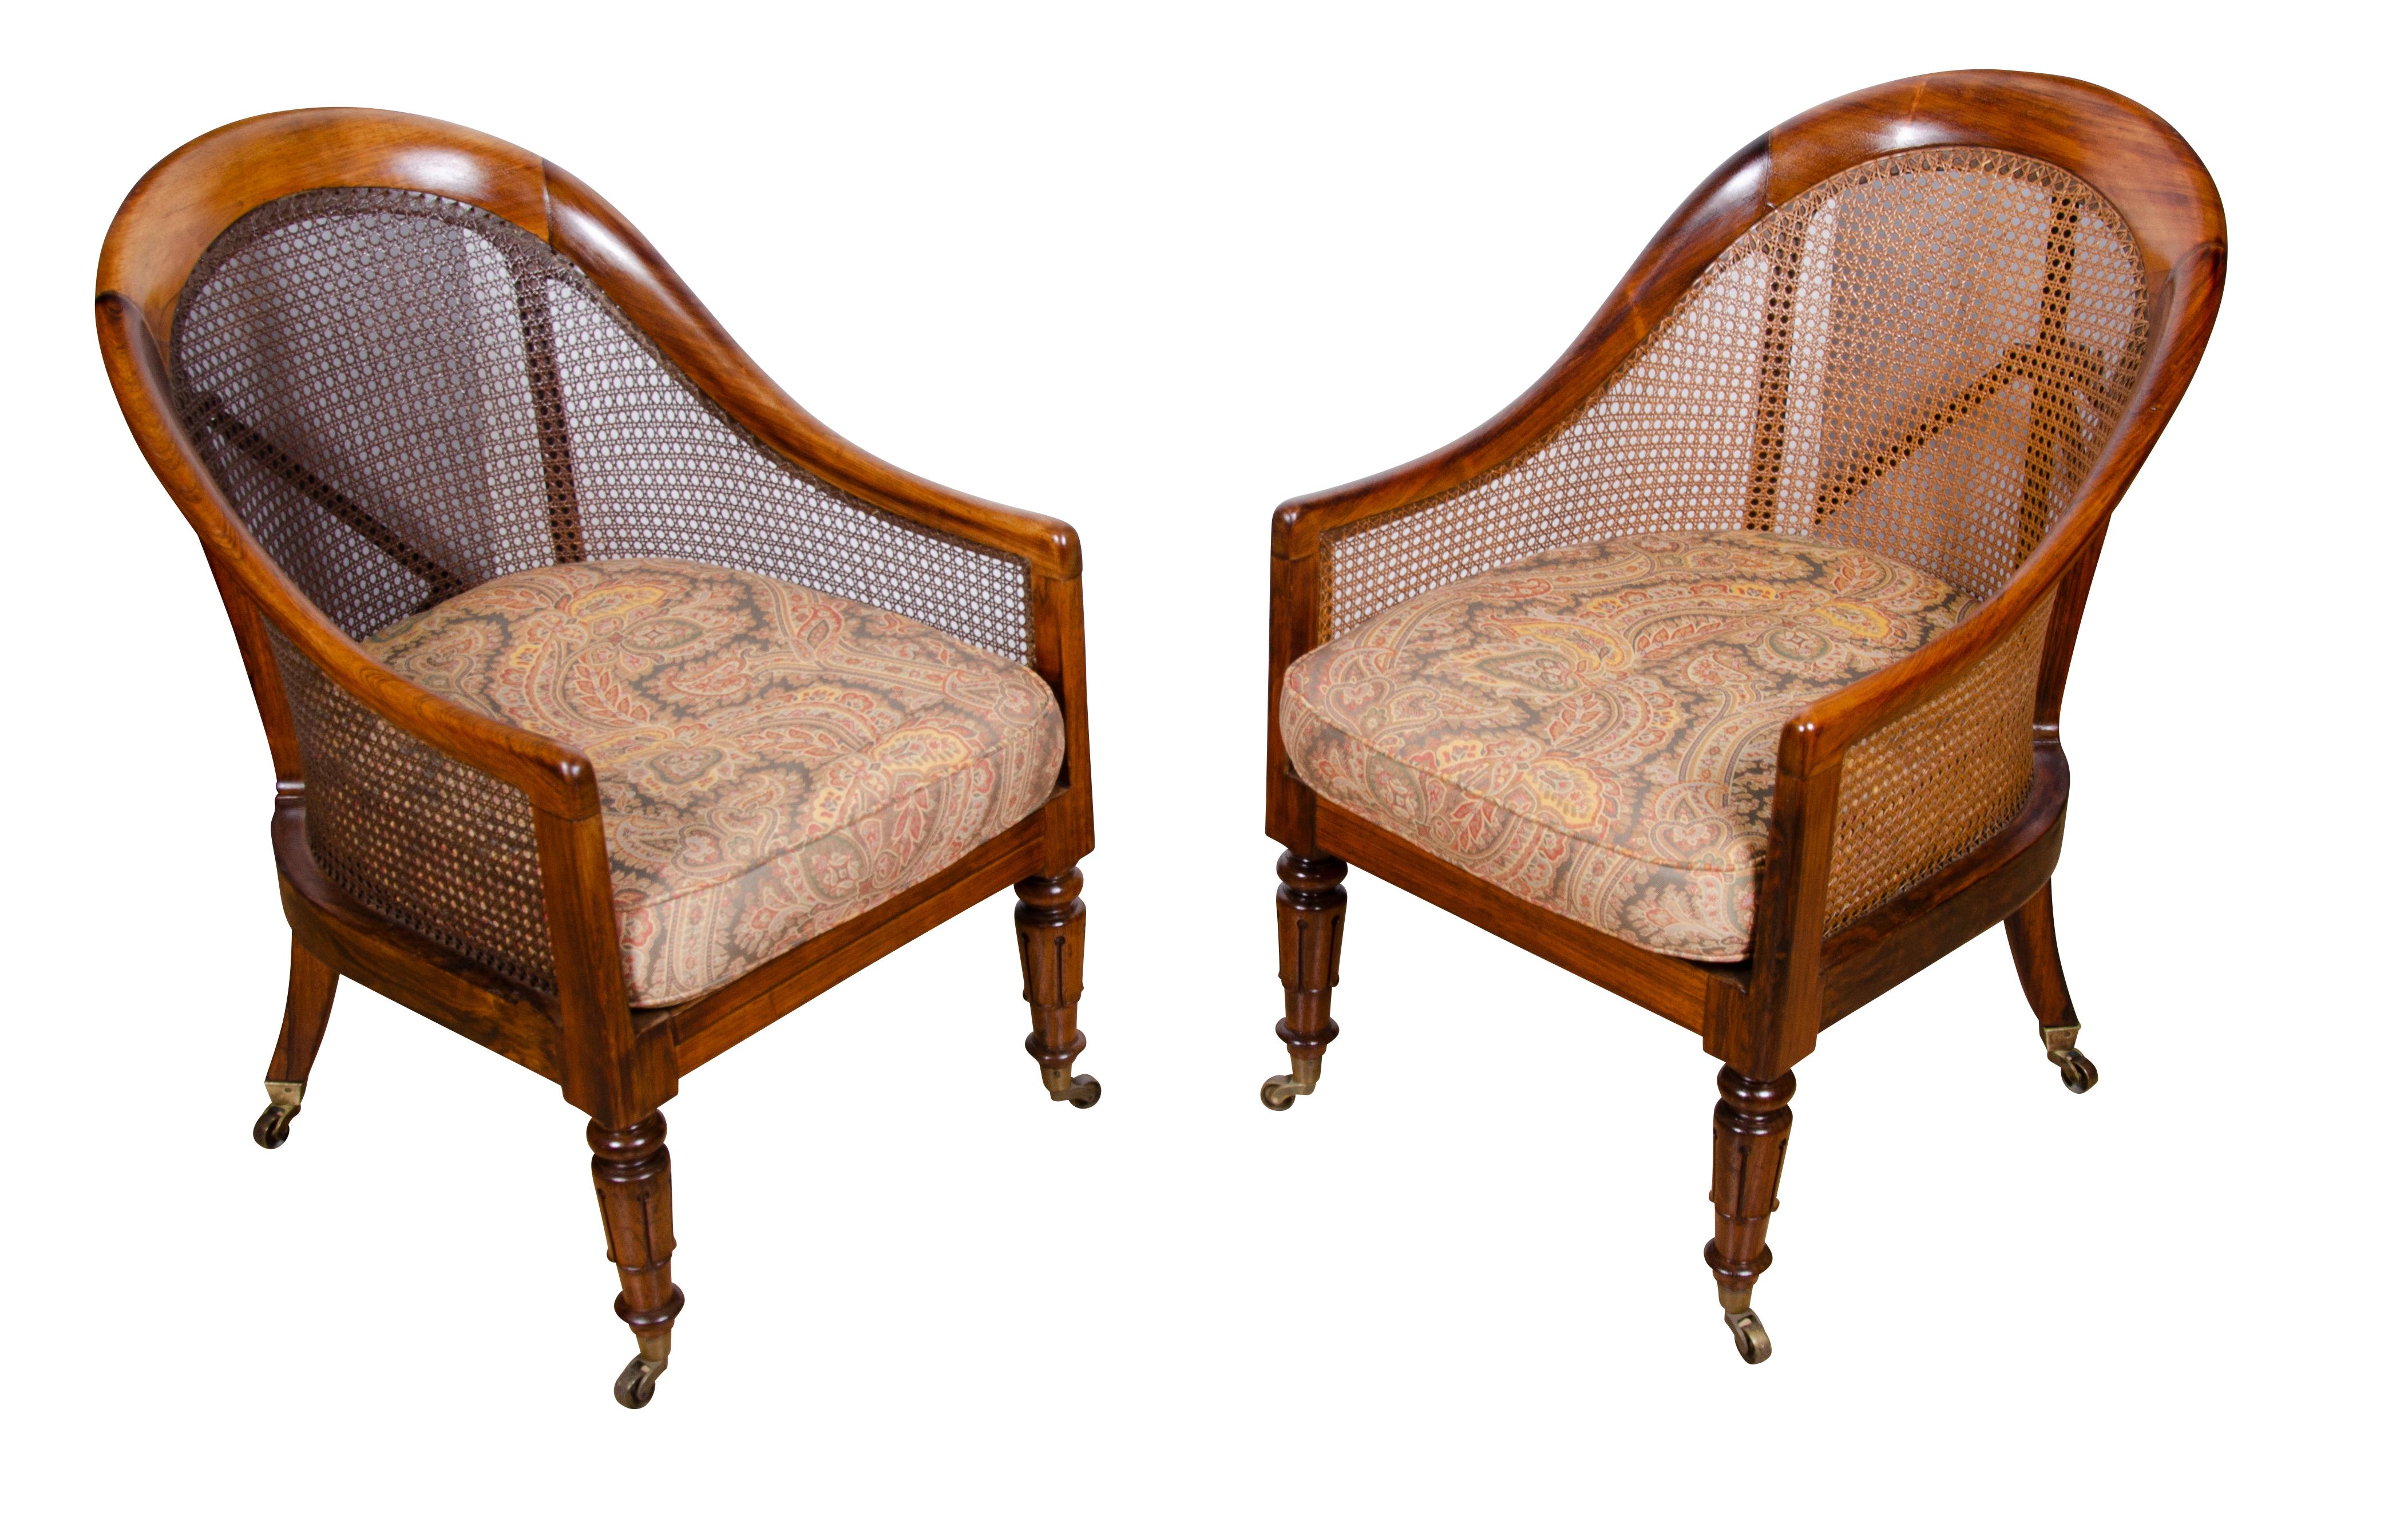 Nice pair of solid rosewood chair with caning in good condition. Wood seats. Raised on circular tapered legs with casters.